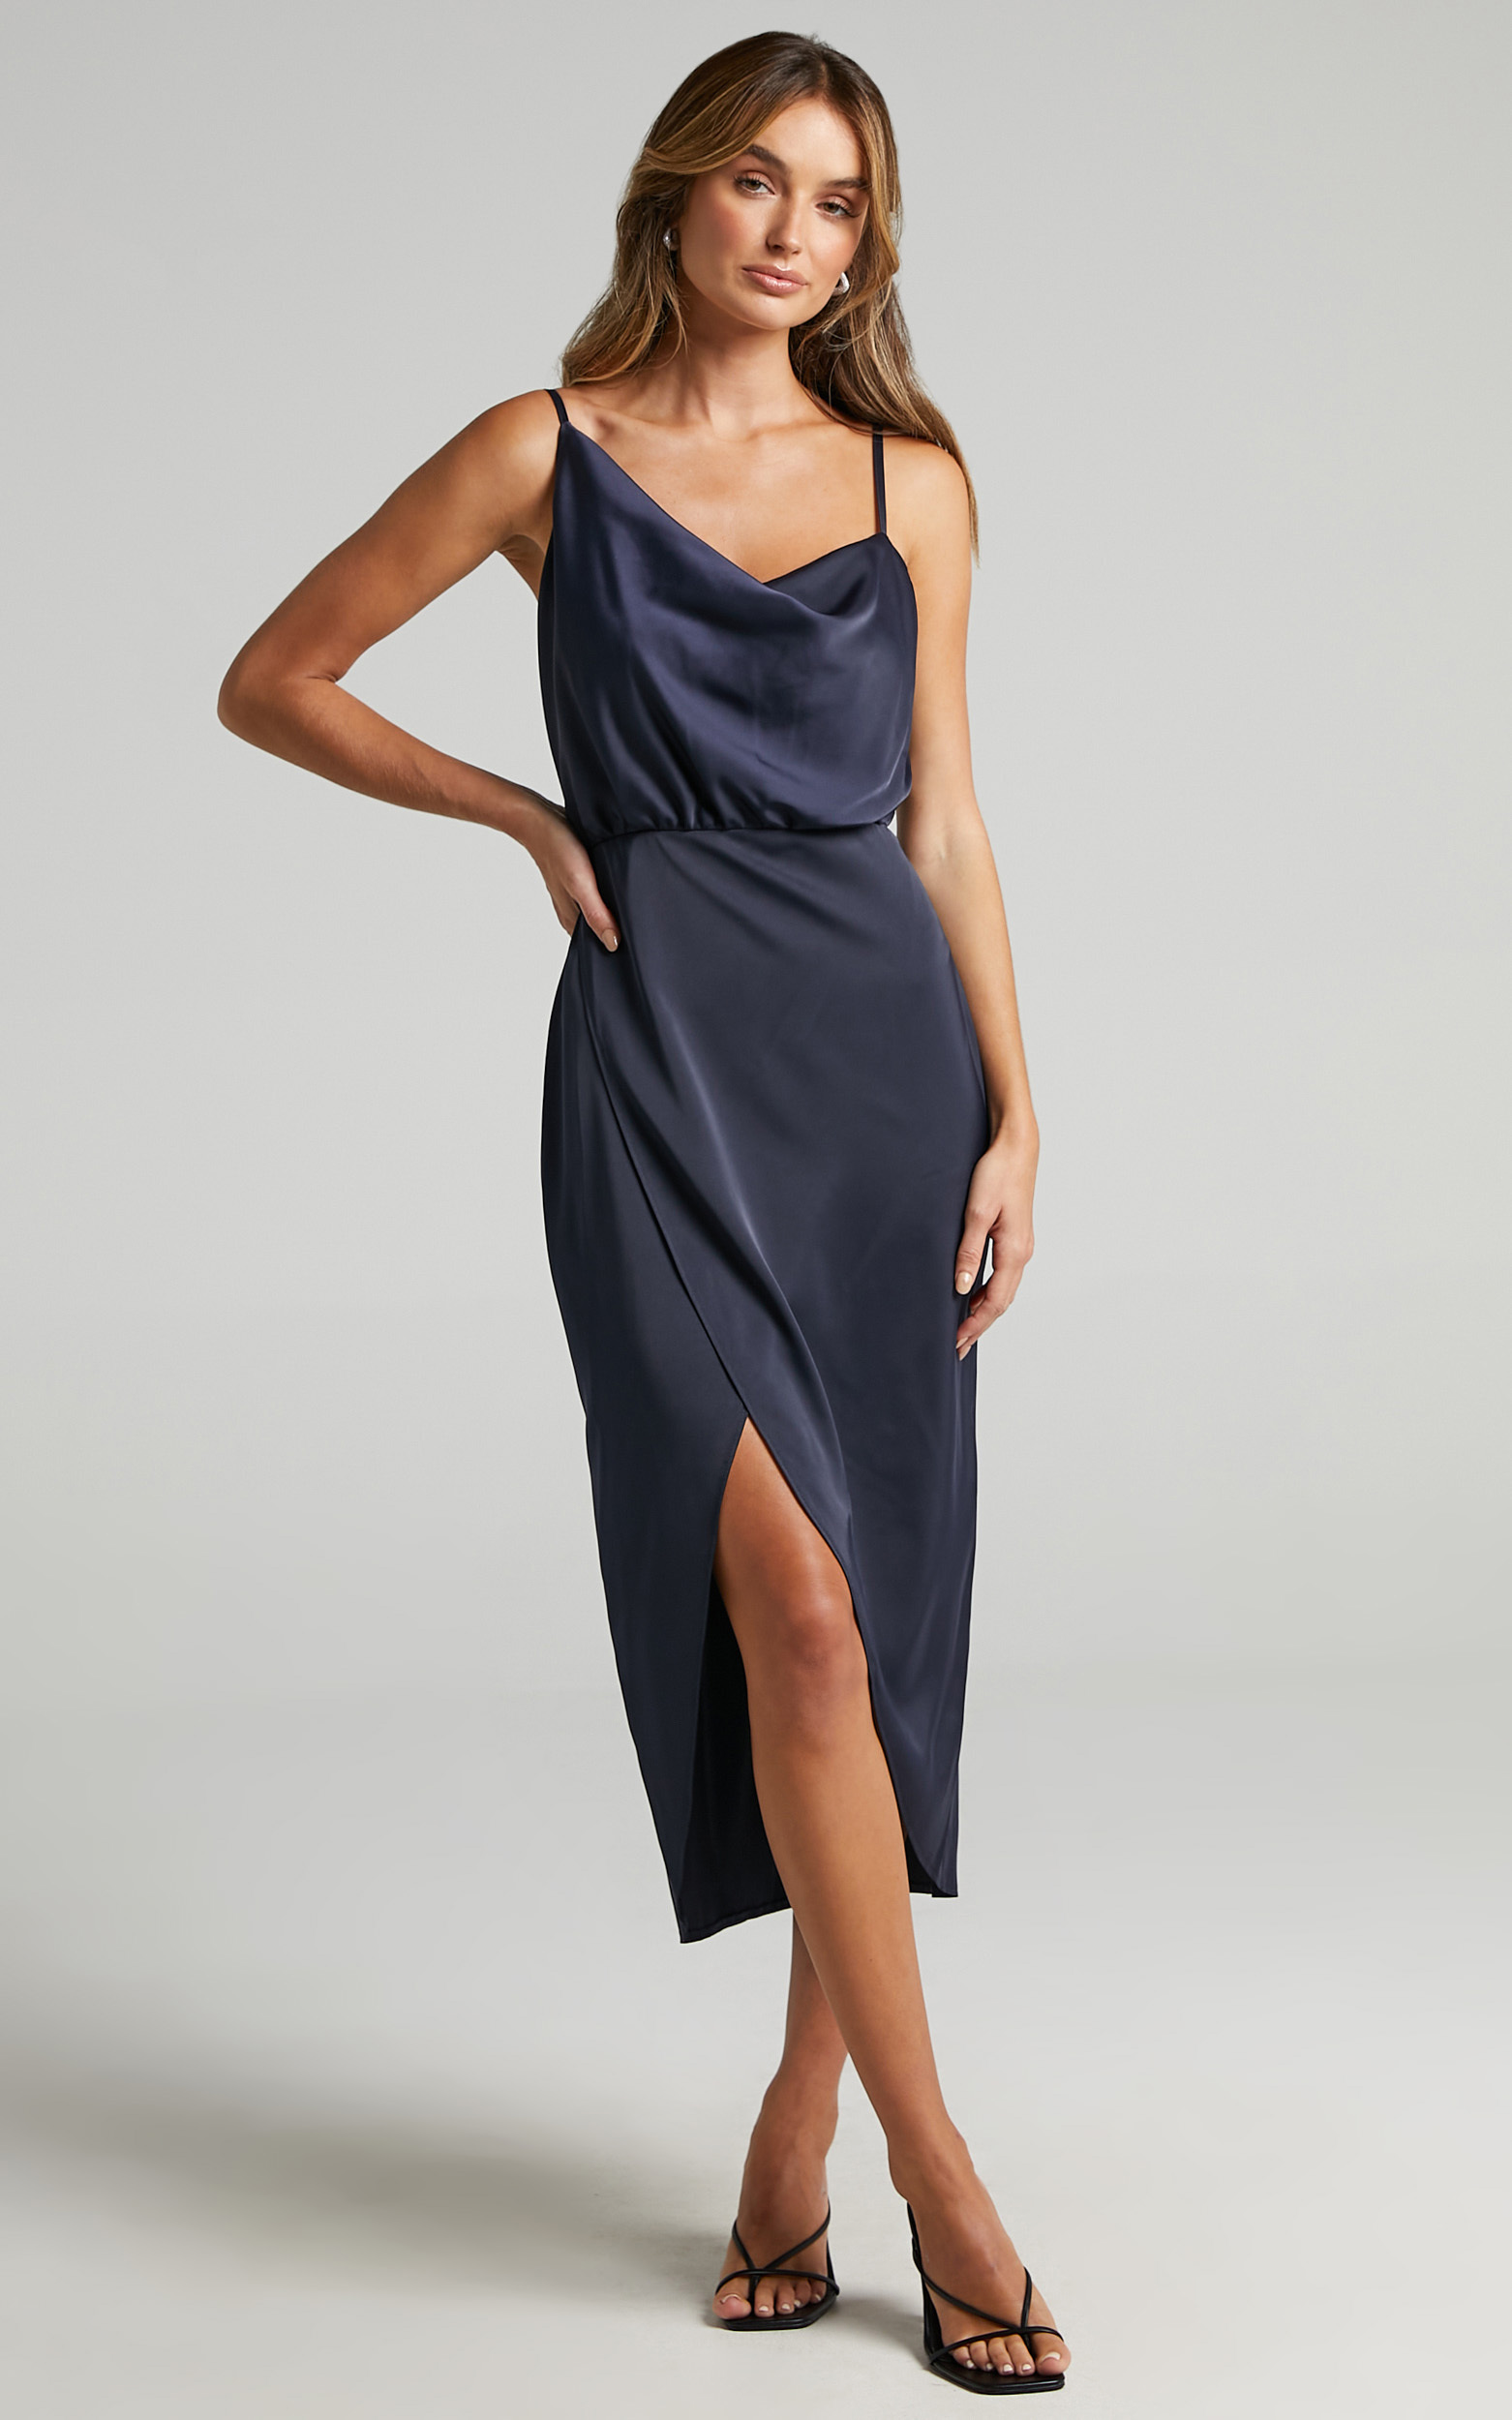 Sisters by Heart Asymmetric Cowl Neck Midi Dress in Navy Satin - 06, NVY4, hi-res image number null